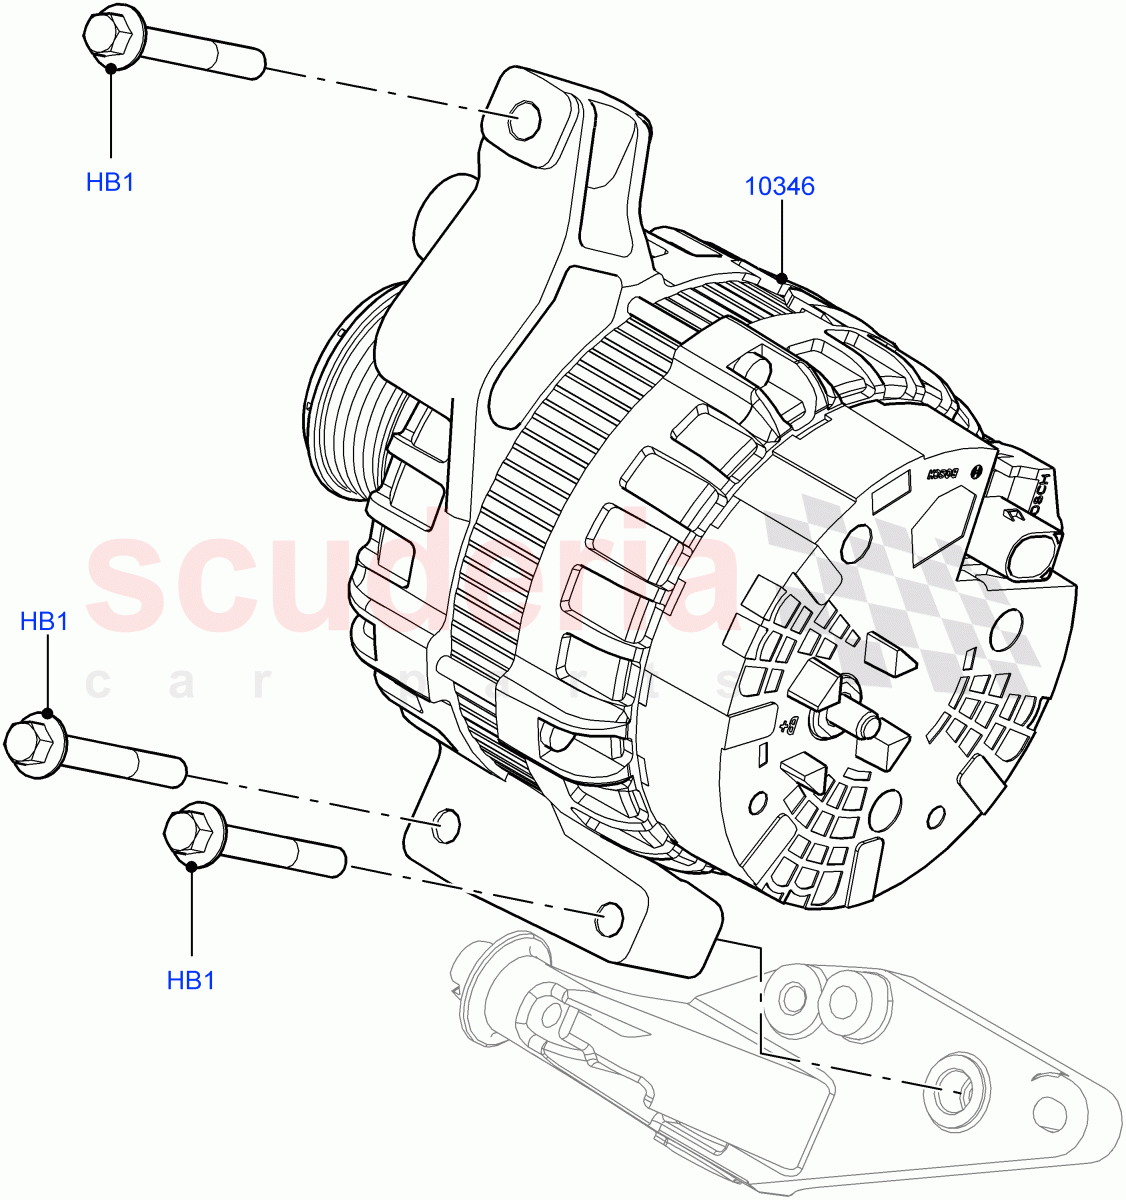 Alternator And Mountings(2.0L 16V TIVCT T/C 240PS Petrol,Itatiaia (Brazil))((V)FROMGT000001) of Land Rover Land Rover Range Rover Evoque (2012-2018) [2.0 Turbo Petrol GTDI]